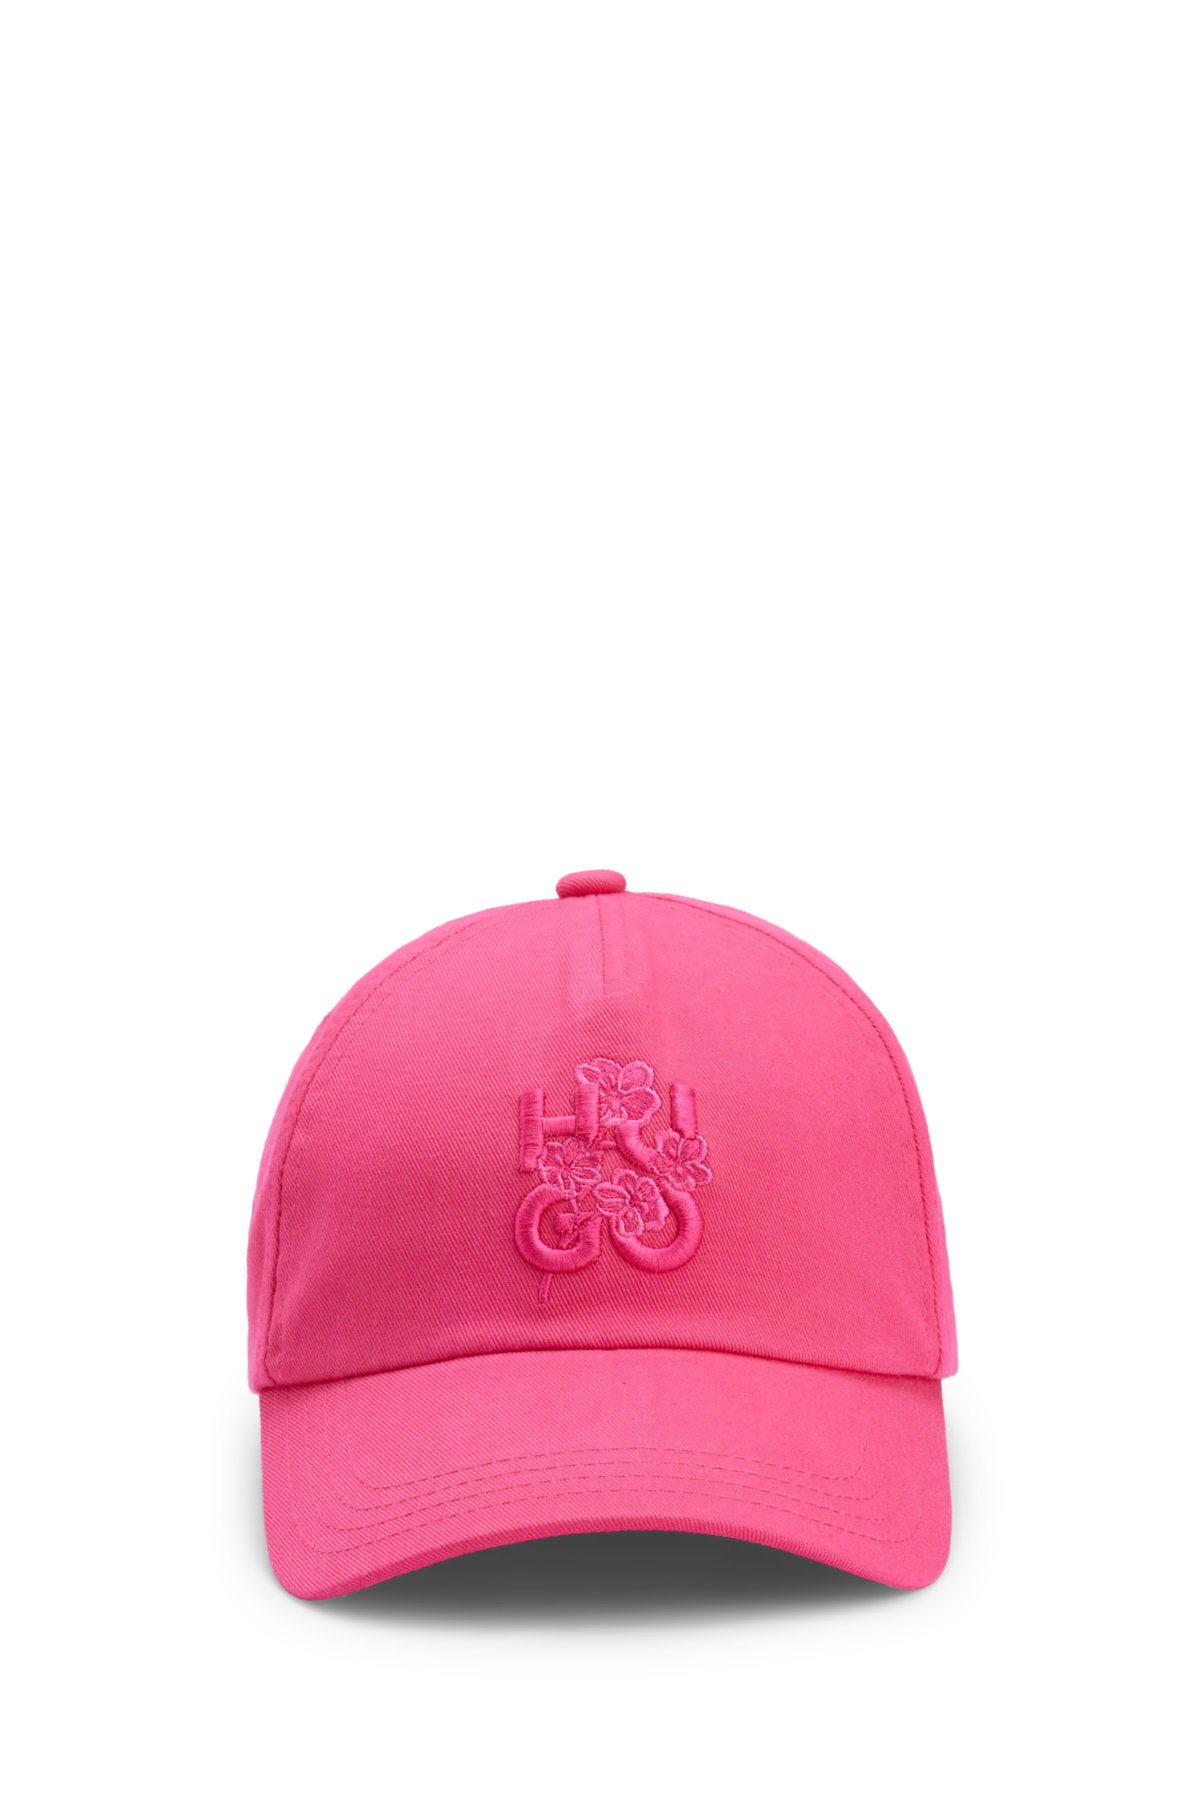 Cotton-twill cap with embroidered floral logo, Pink